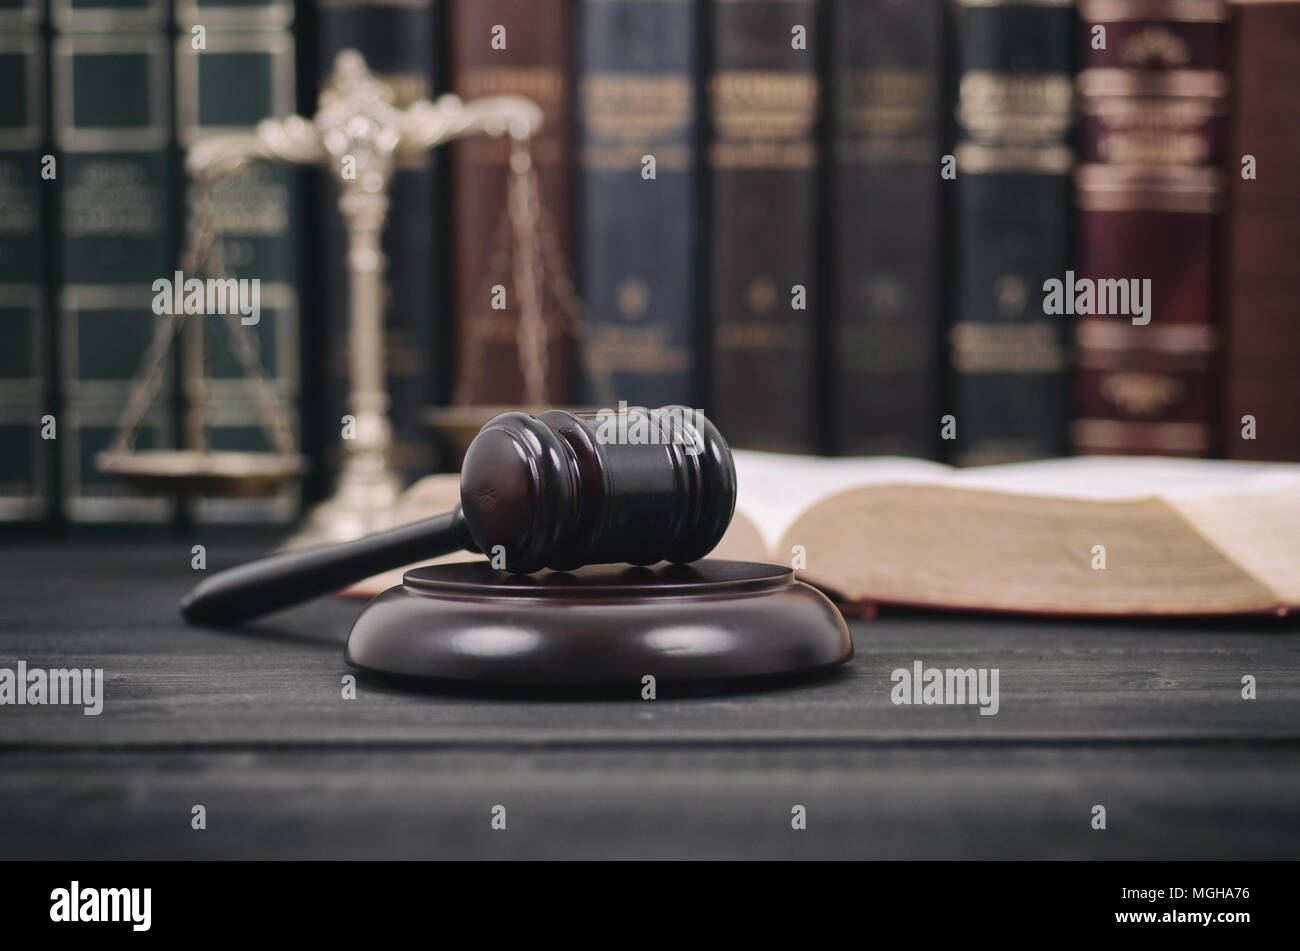 Law and Justice, Legality concept, Scales of Justice and Judge Gavel on a black wooden background. Stock Photo